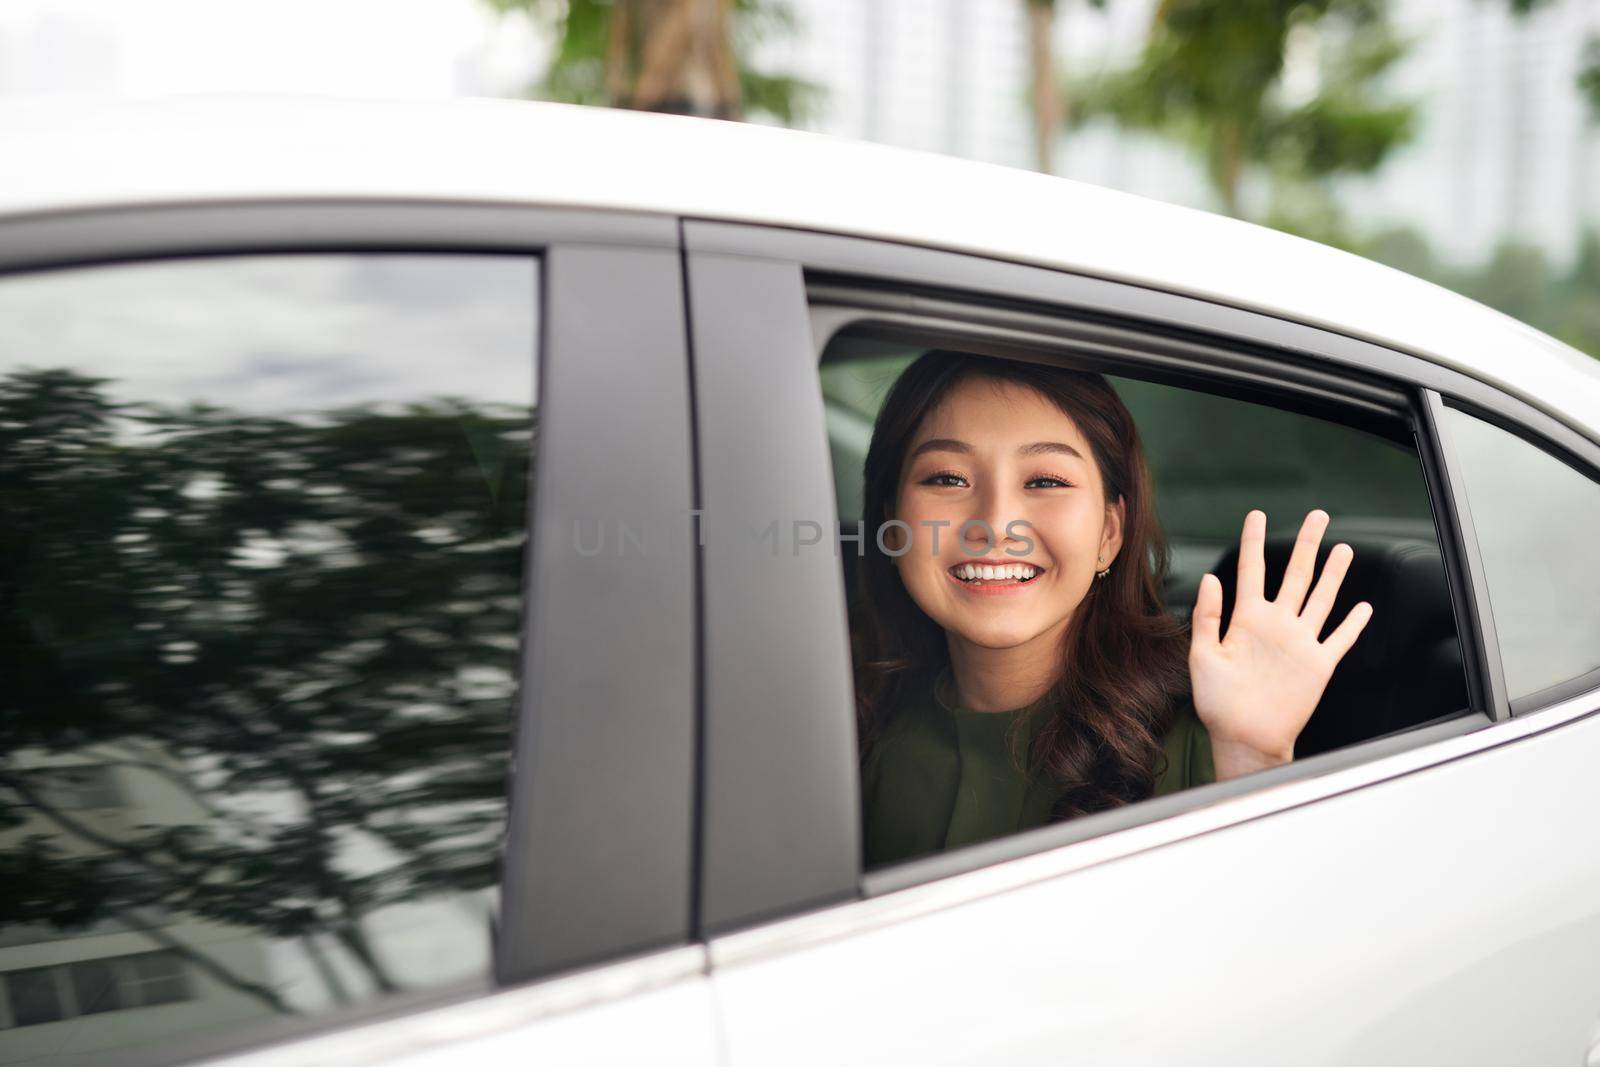 Woman in car. Beautiful young woman looking out from a car and looking at camera